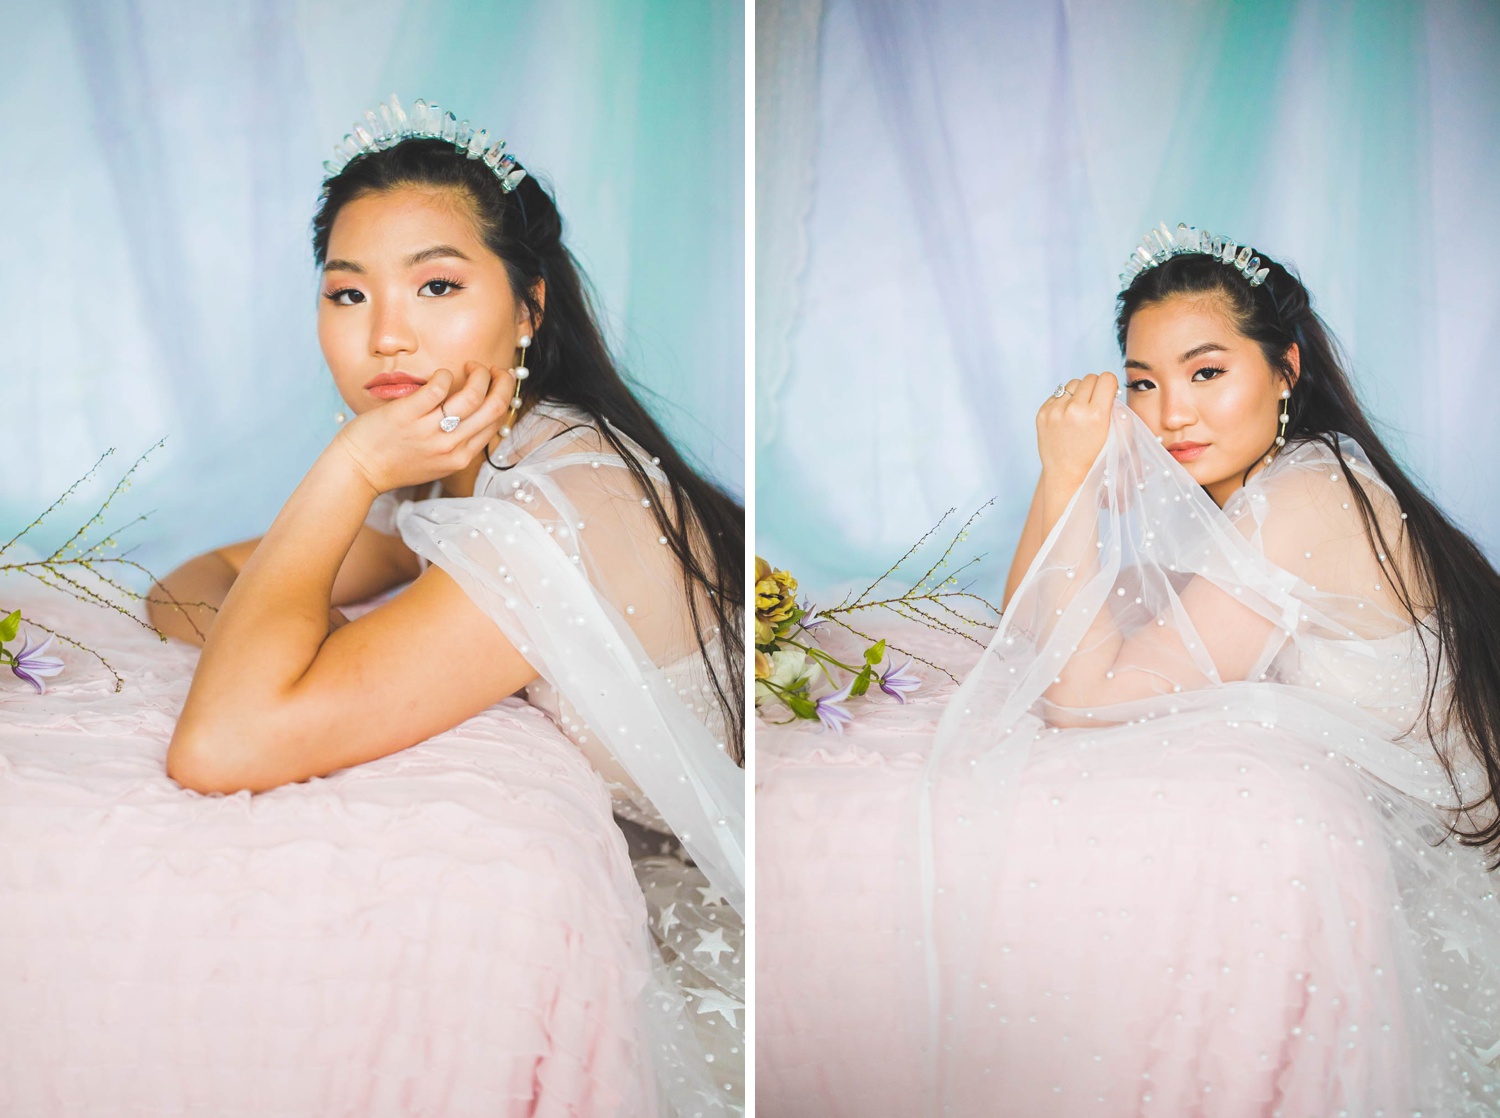 ethereal and colorful wedding photos in fayetteville, bridals taken in studio